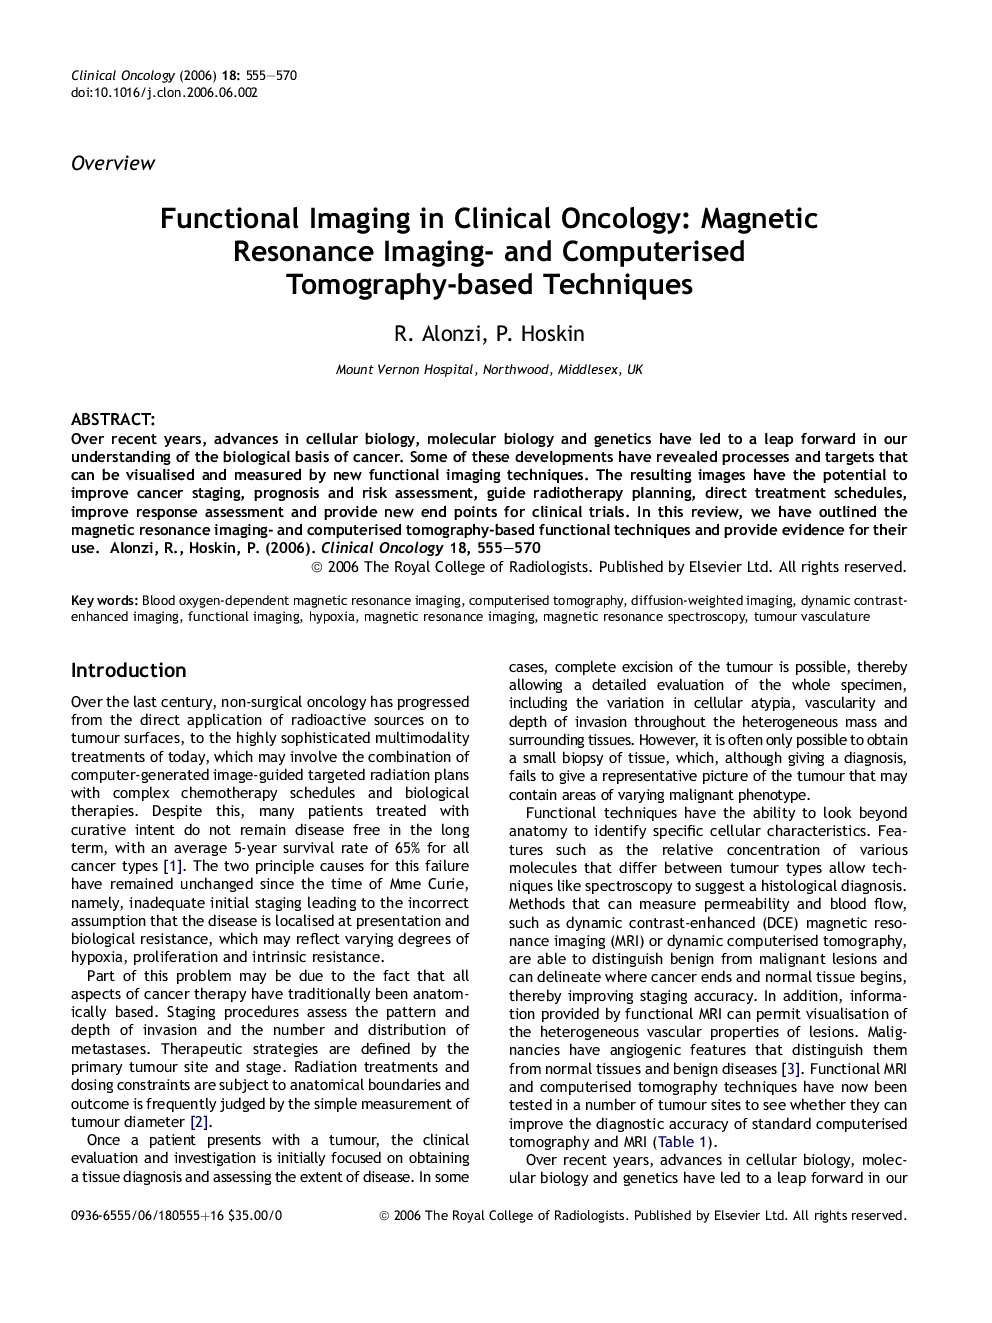 Functional Imaging in Clinical Oncology: Magnetic Resonance Imaging- and Computerised Tomography-based Techniques